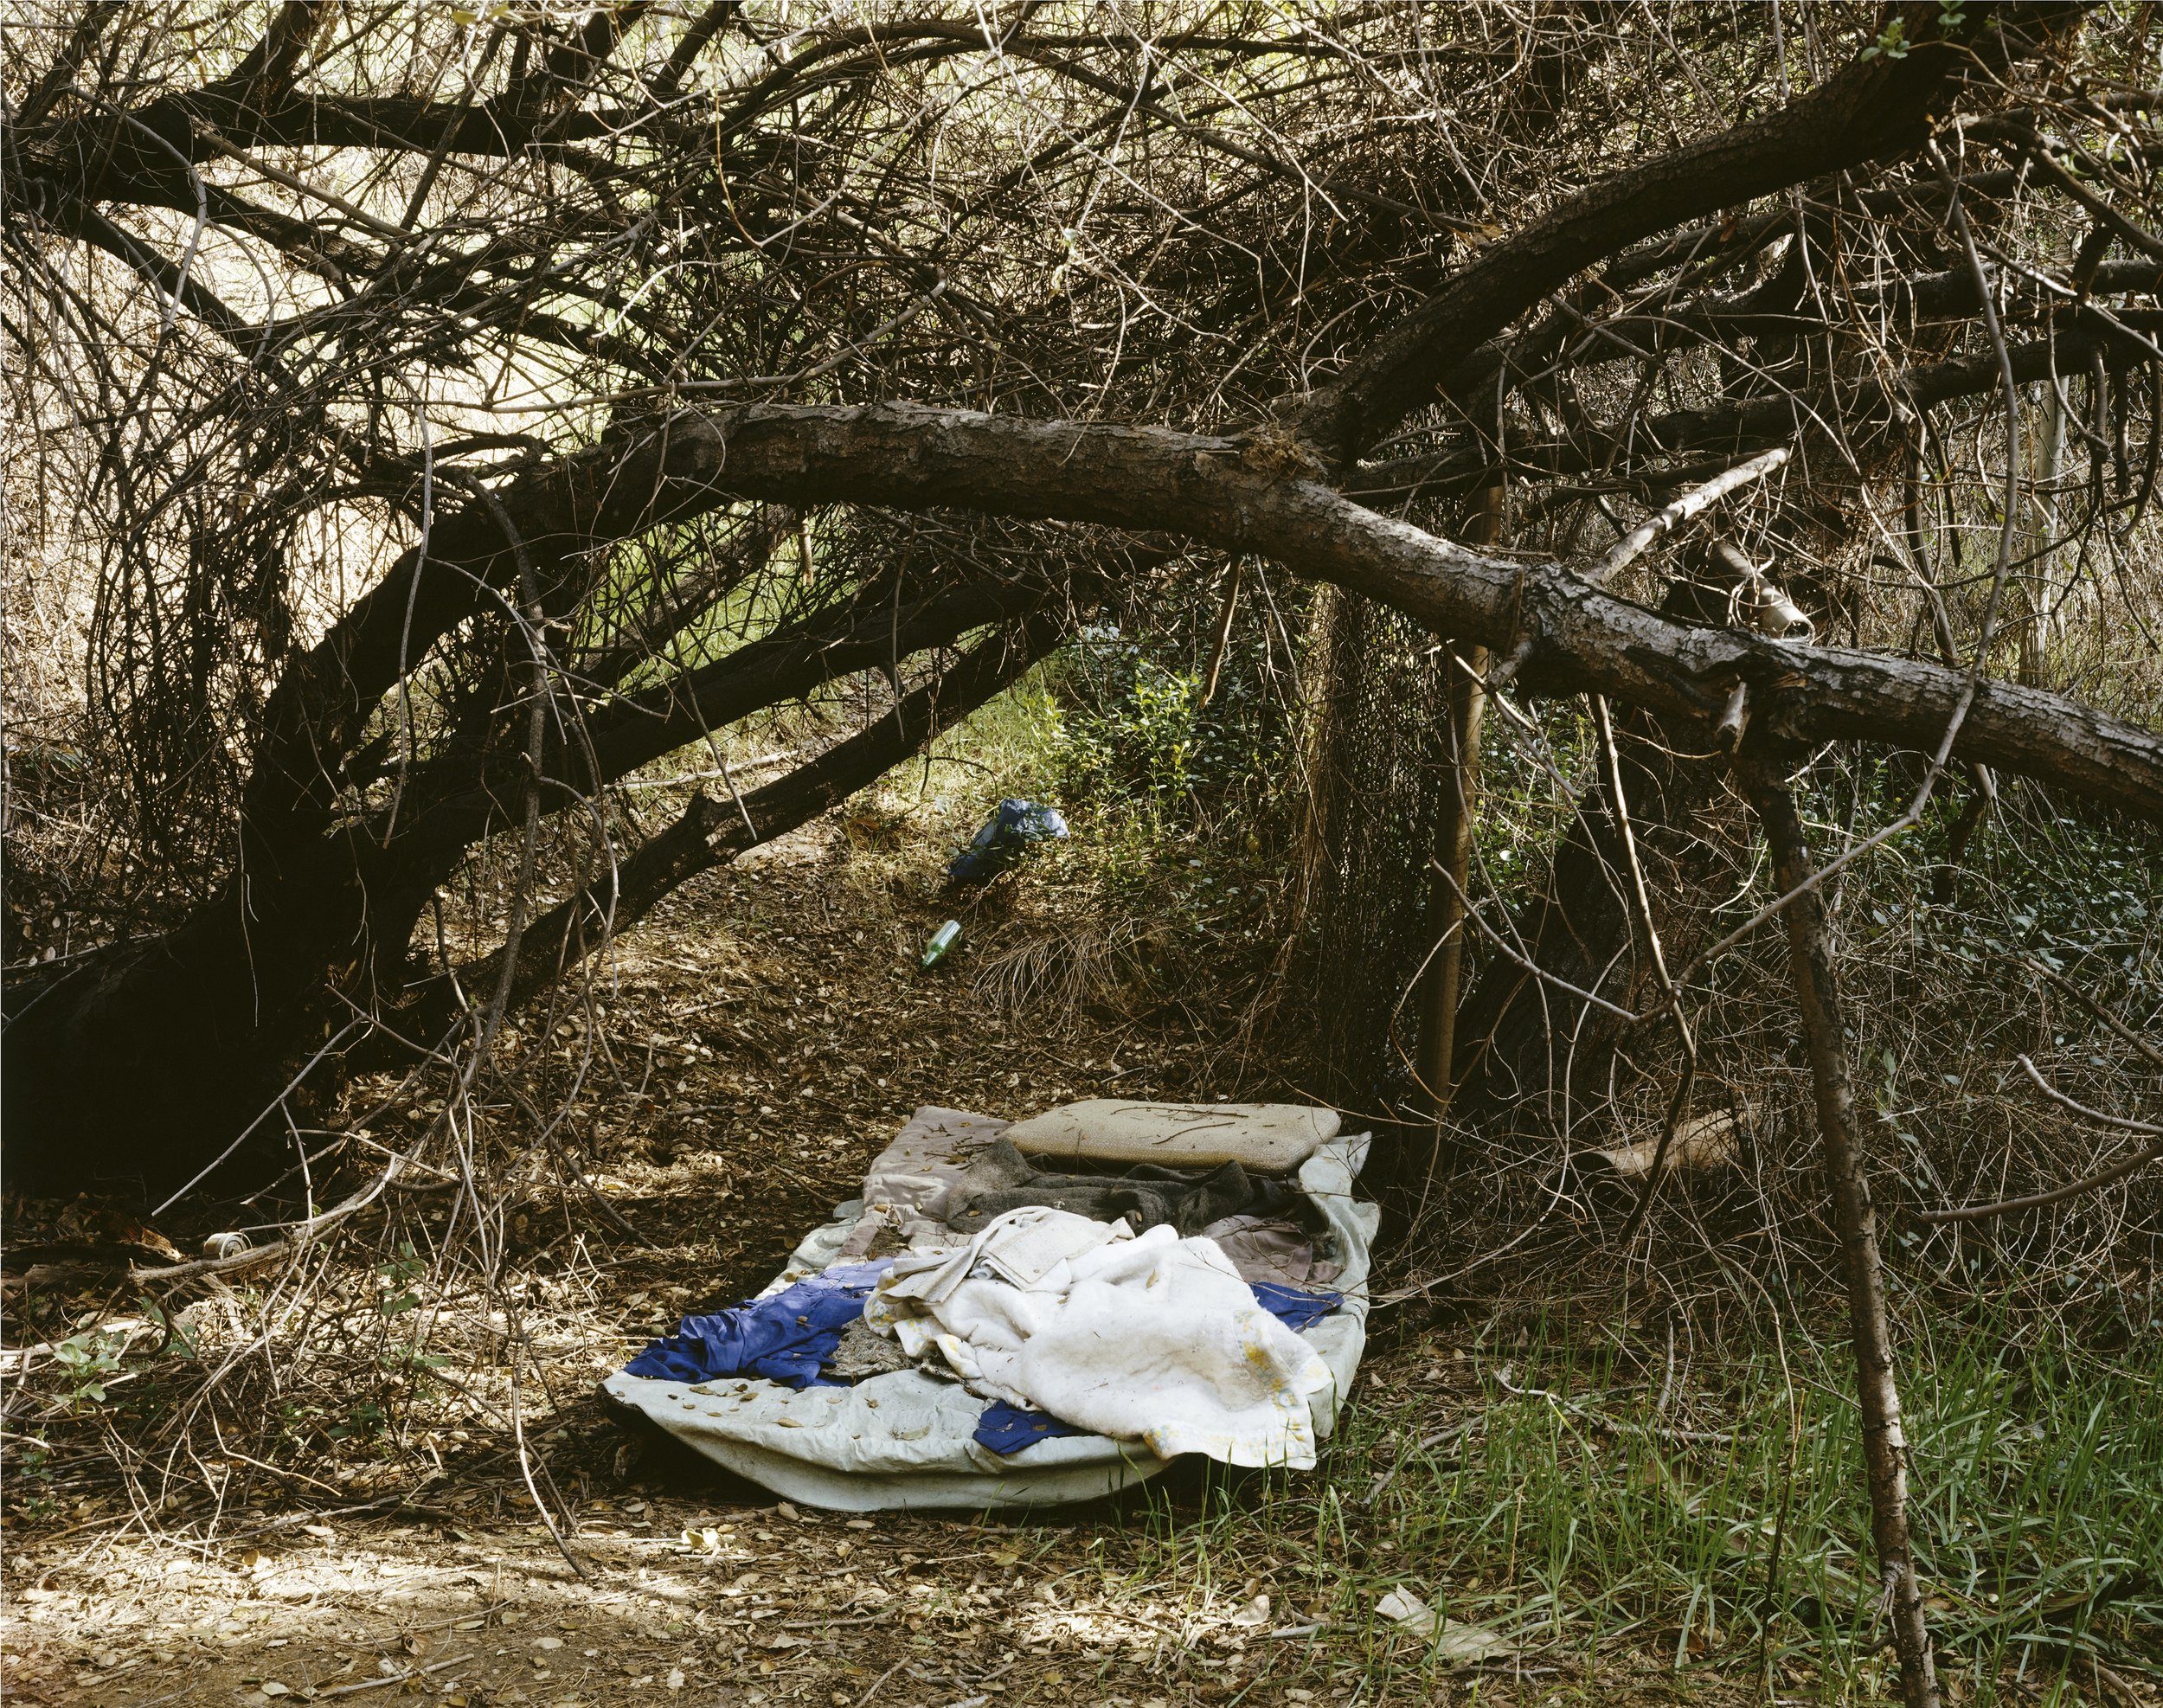  Anthony Hernandez,  Landscapes for the Homeless #12 , 1989–2007, digital print on Endura paper, 50 x 63 inches. Courtesy of Christopher Grimes Gallery, Los Angeles. 